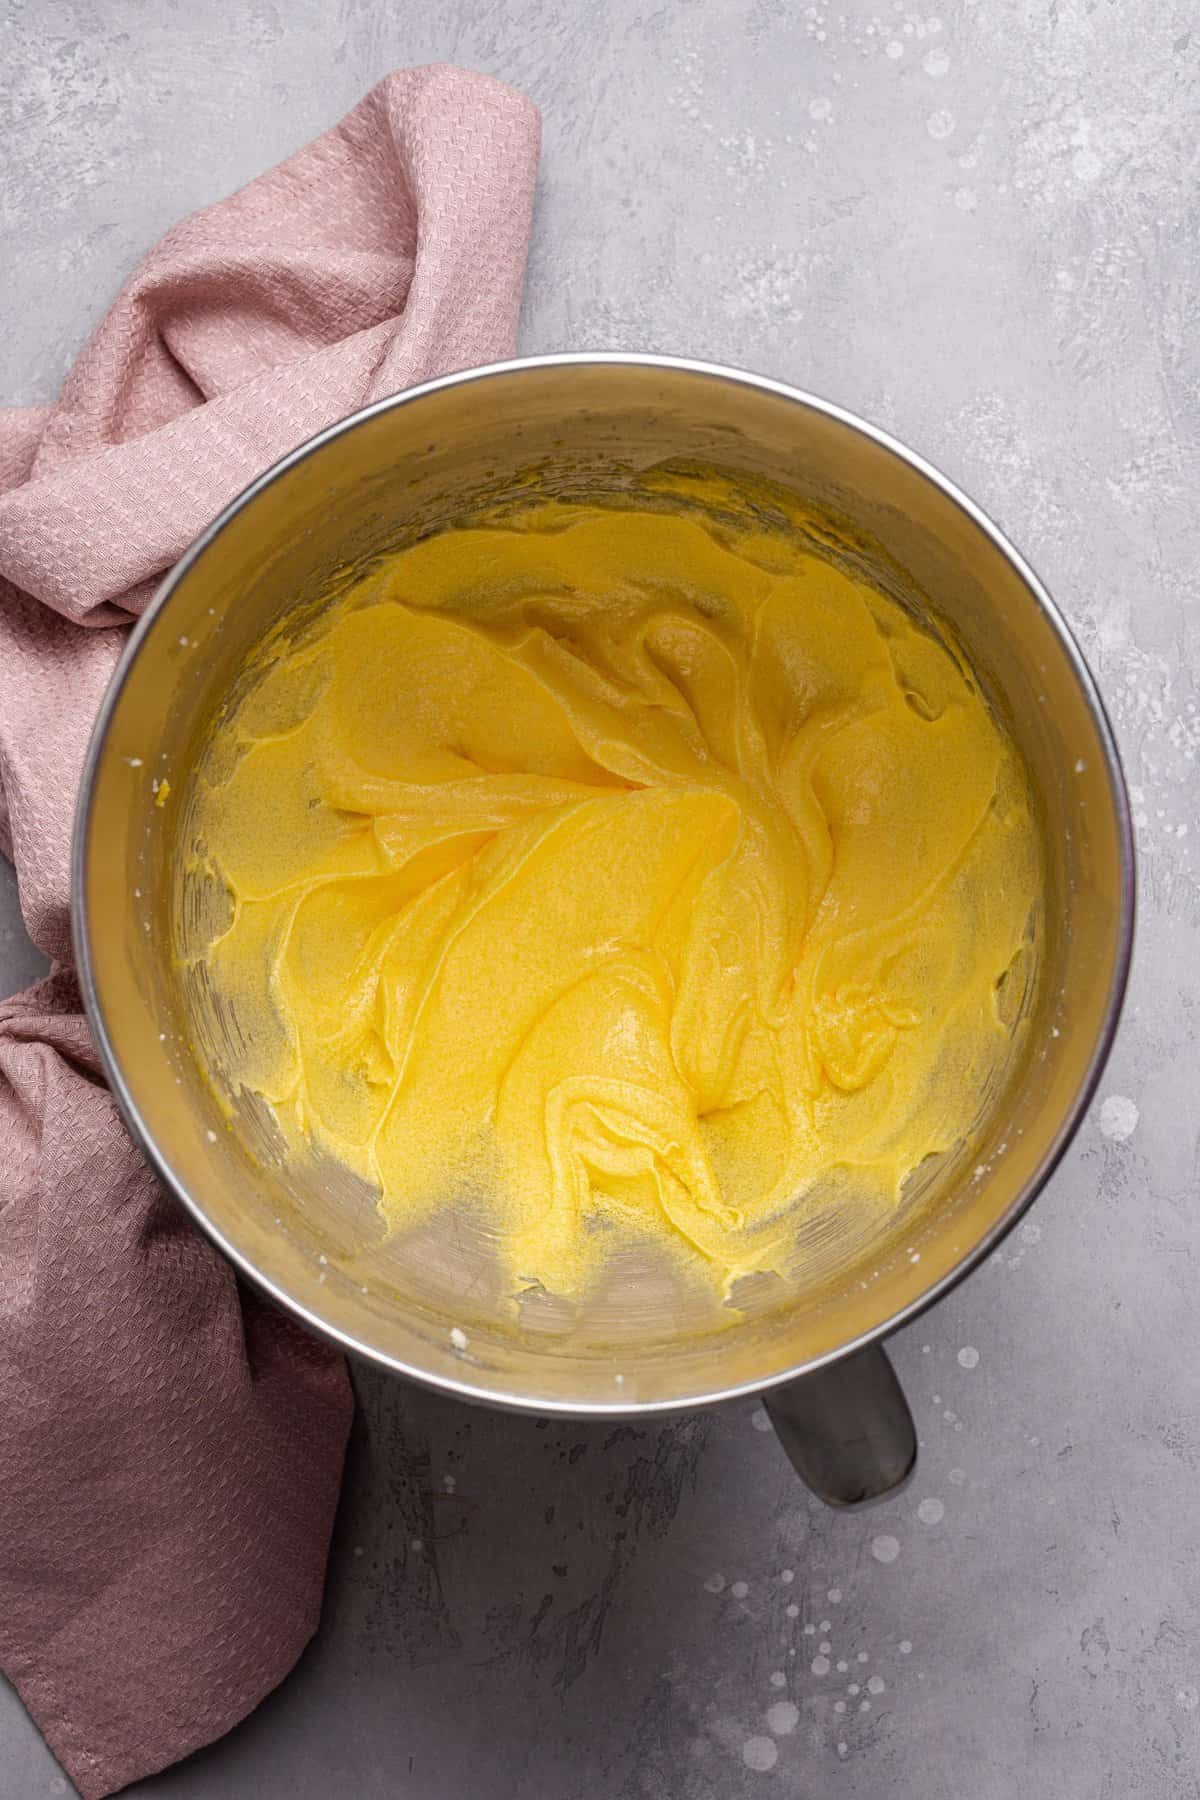 Beating the eggs, oil, butter, and sugar together in a metal bowl. 